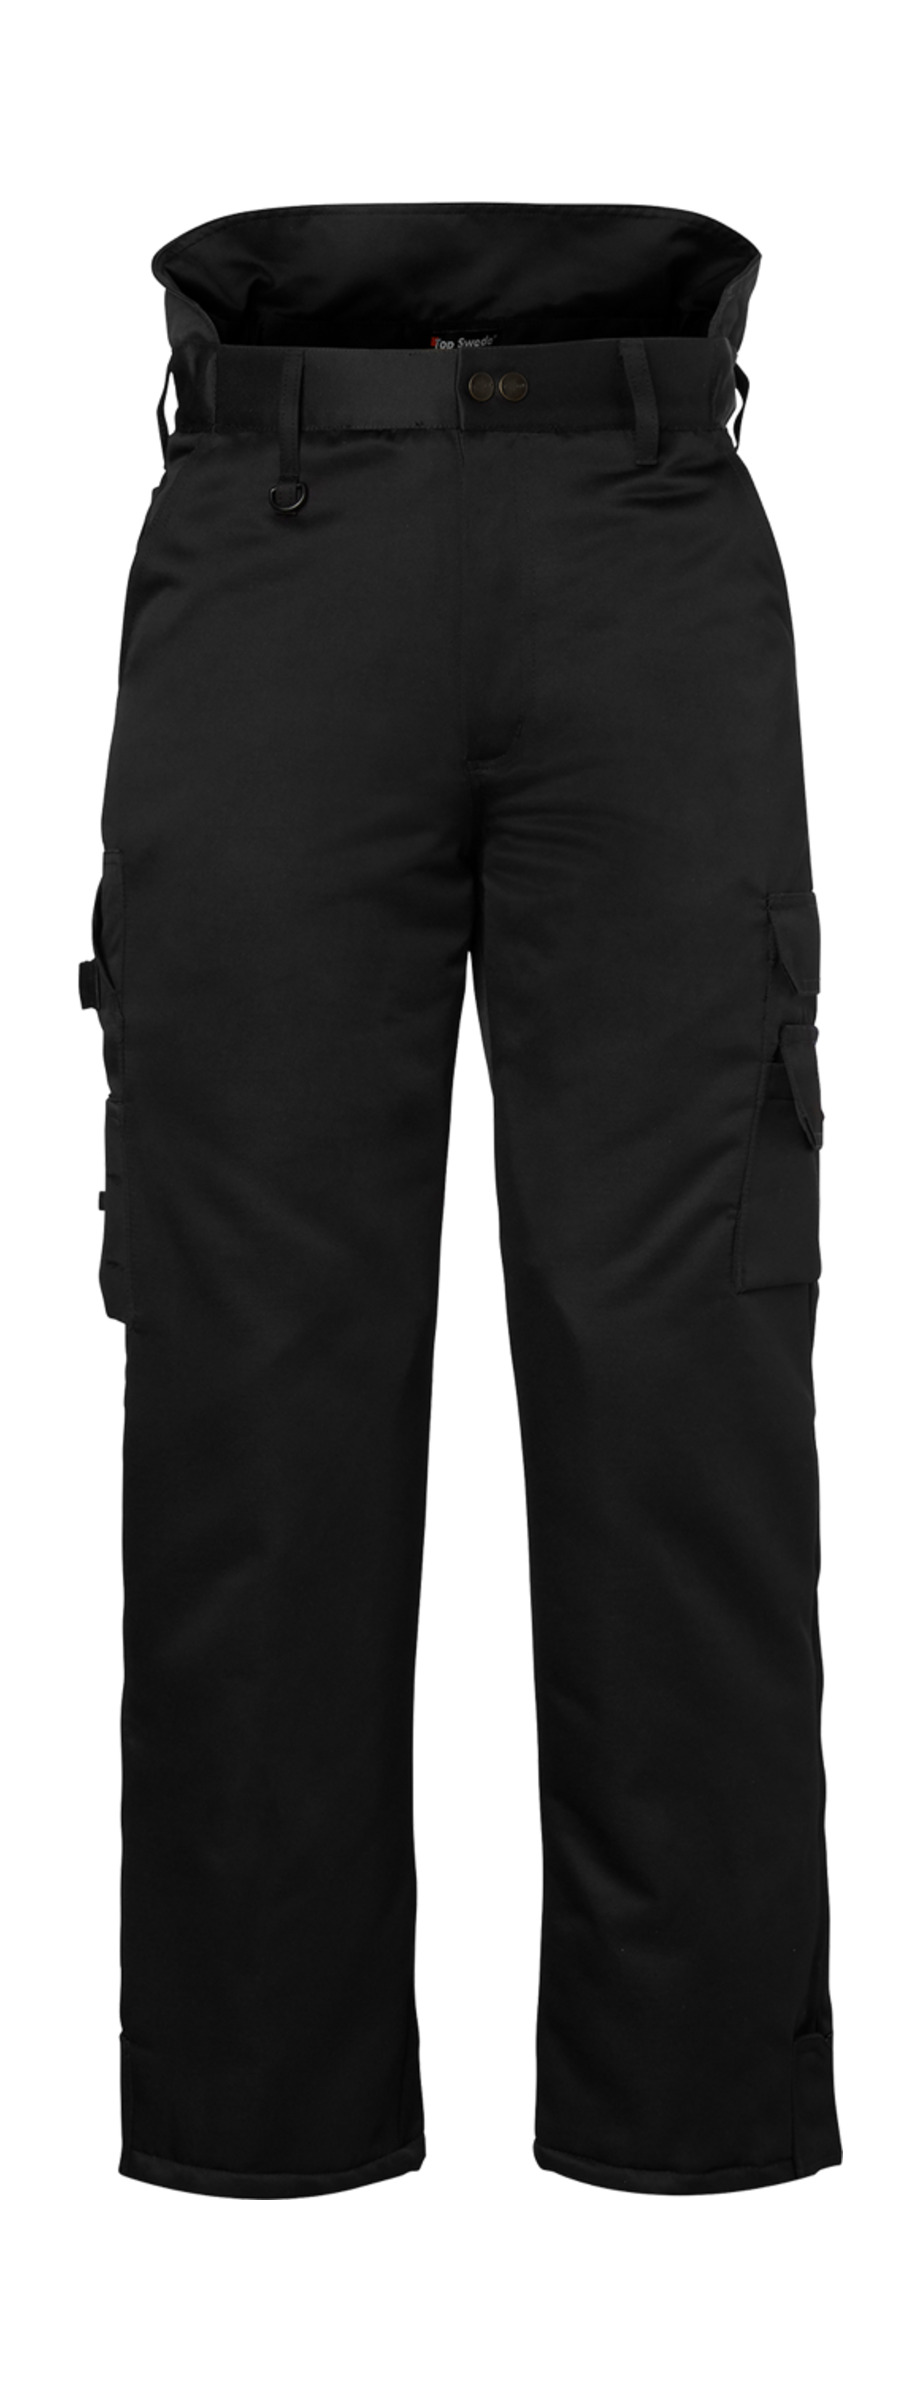 Top Swede 4026 Winter Trousers